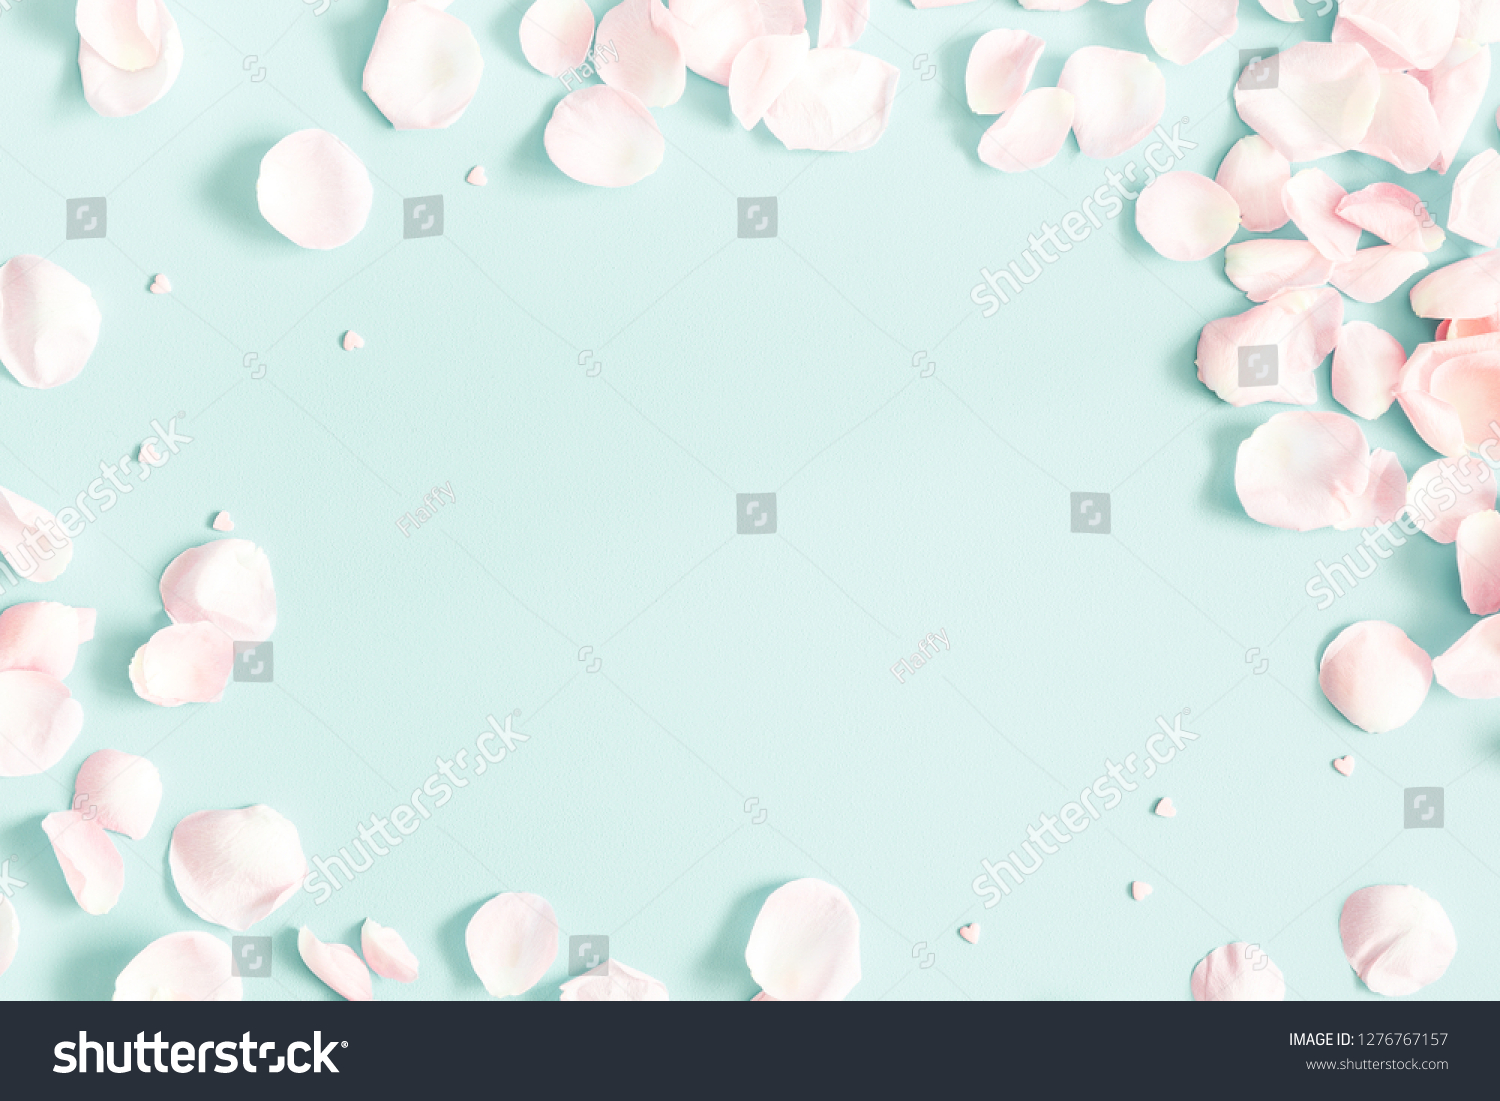 Flowers composition. Rose flower petals on pastel blue background. Valentine's Day, Mother's Day concept. Flat lay, top view, copy space #1276767157